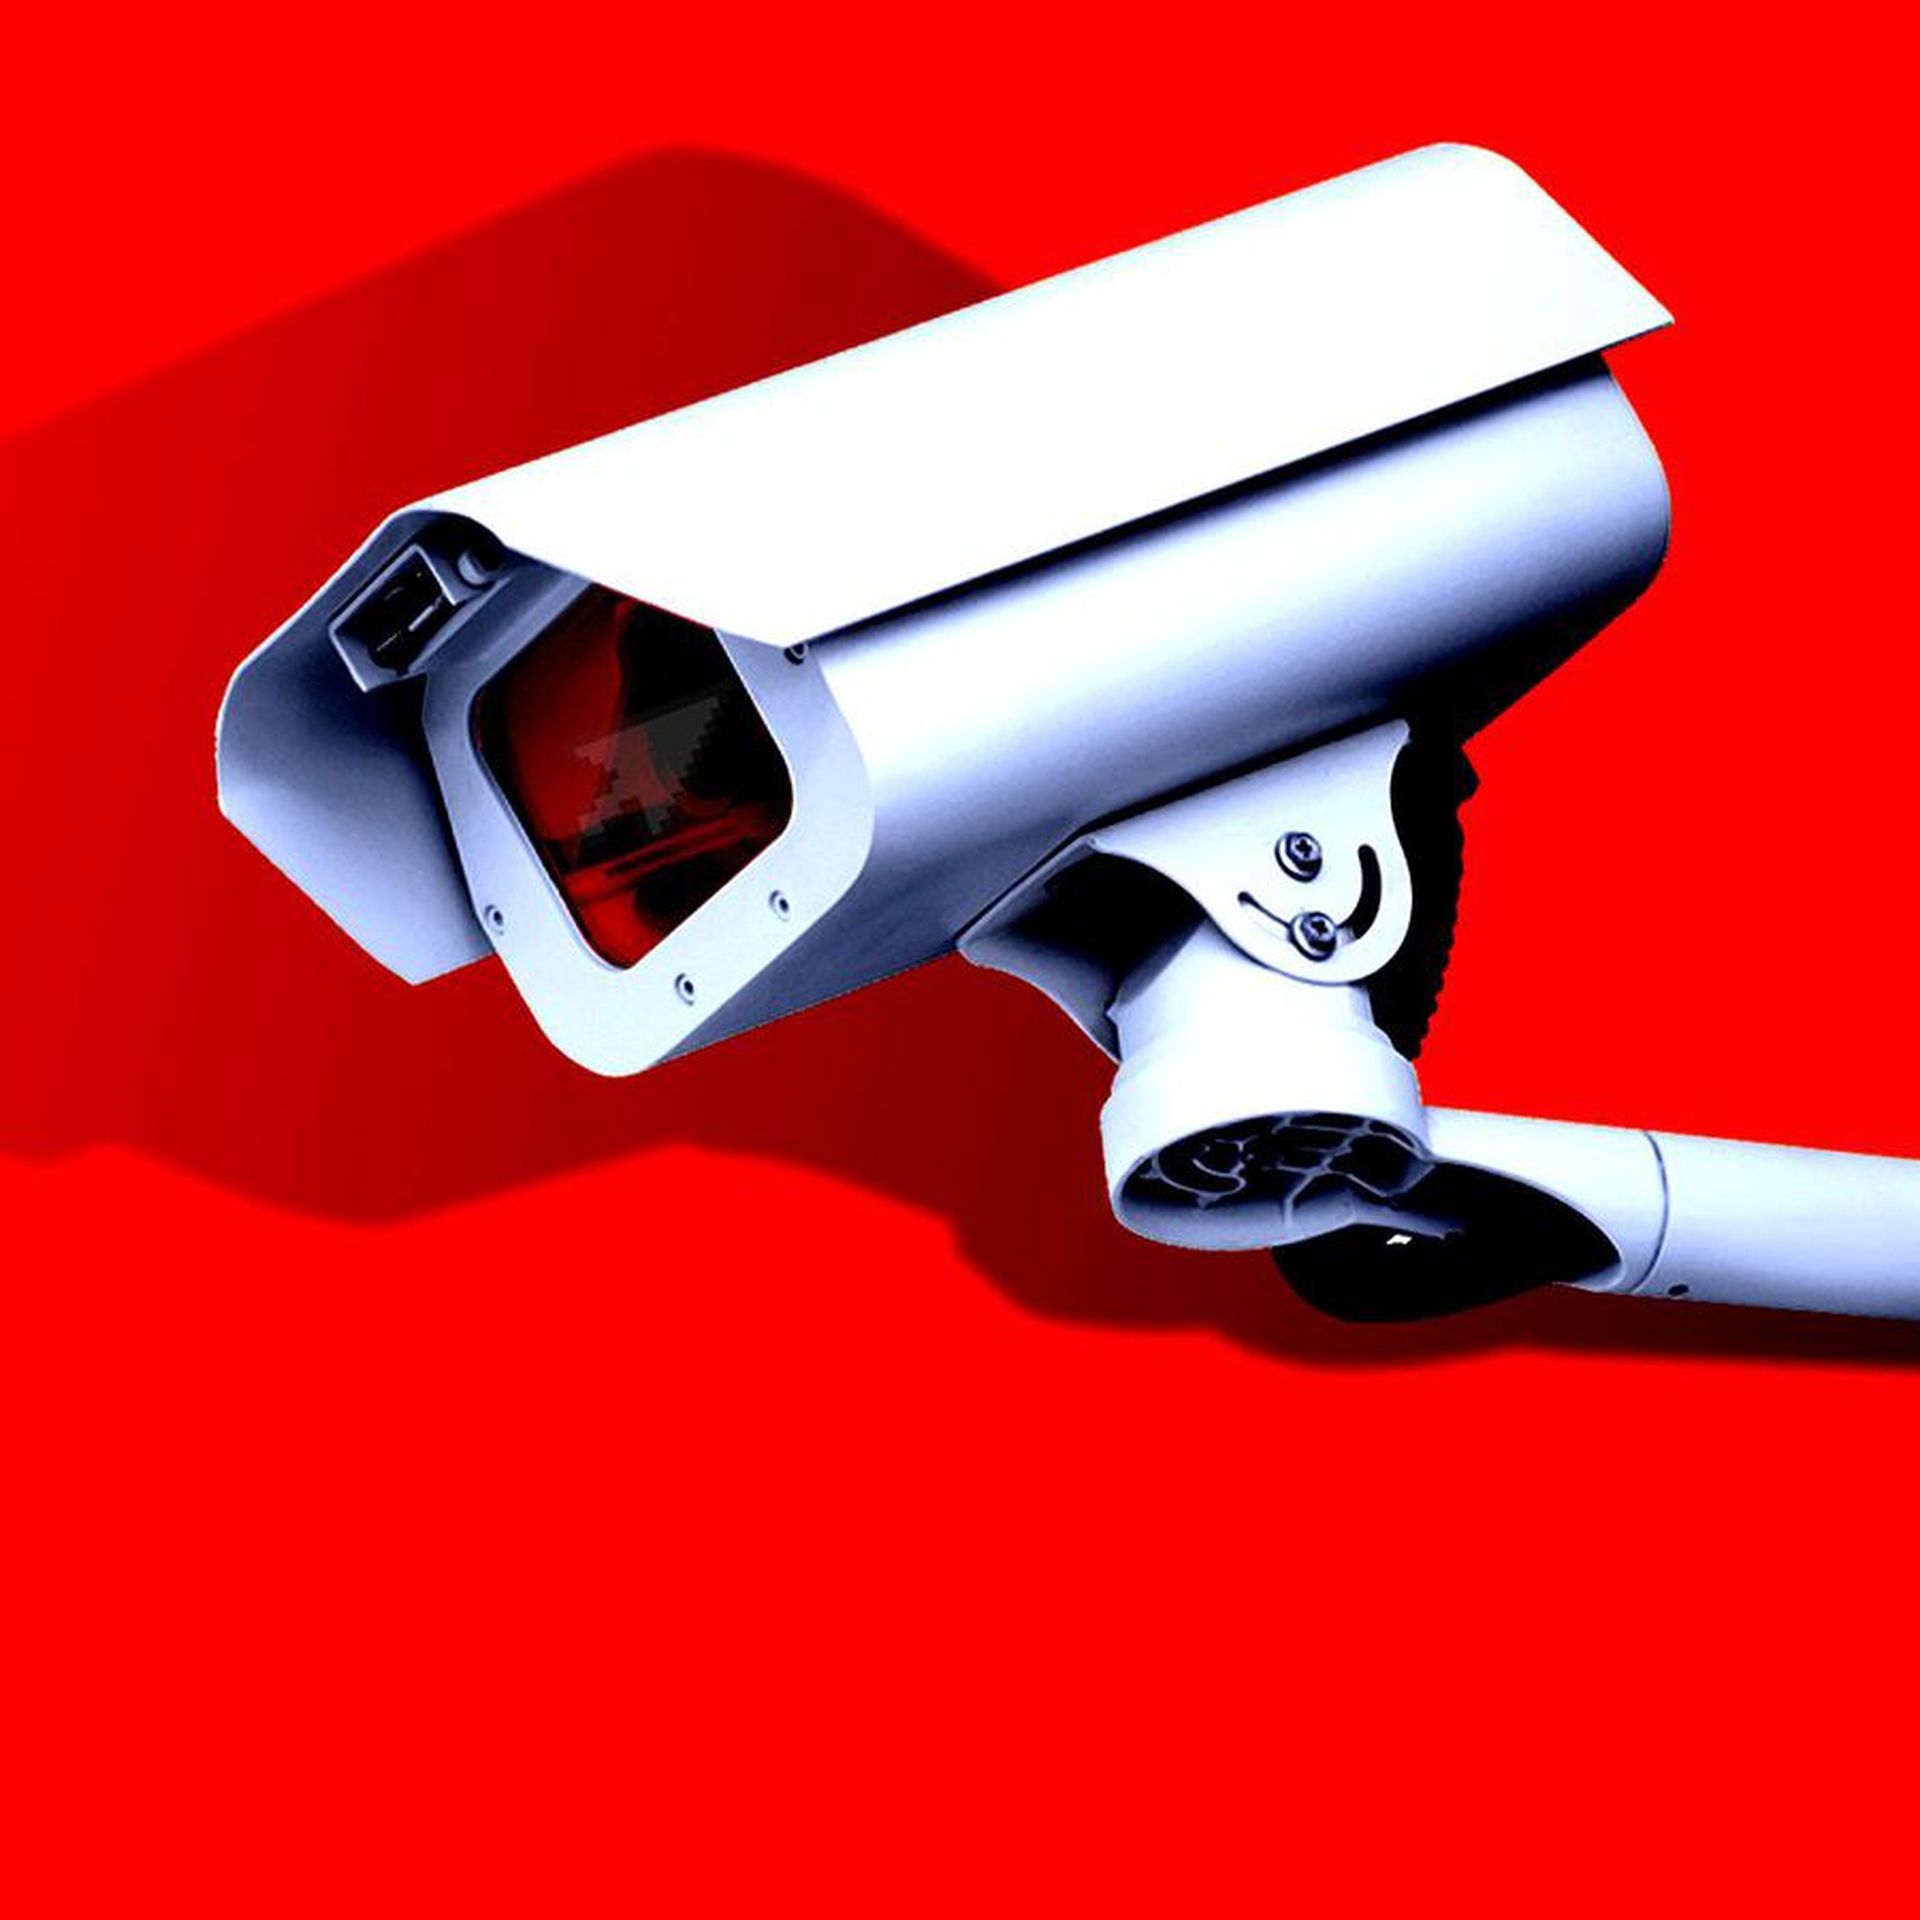 An illustration showing a surveillance camera and mouse pointer. 